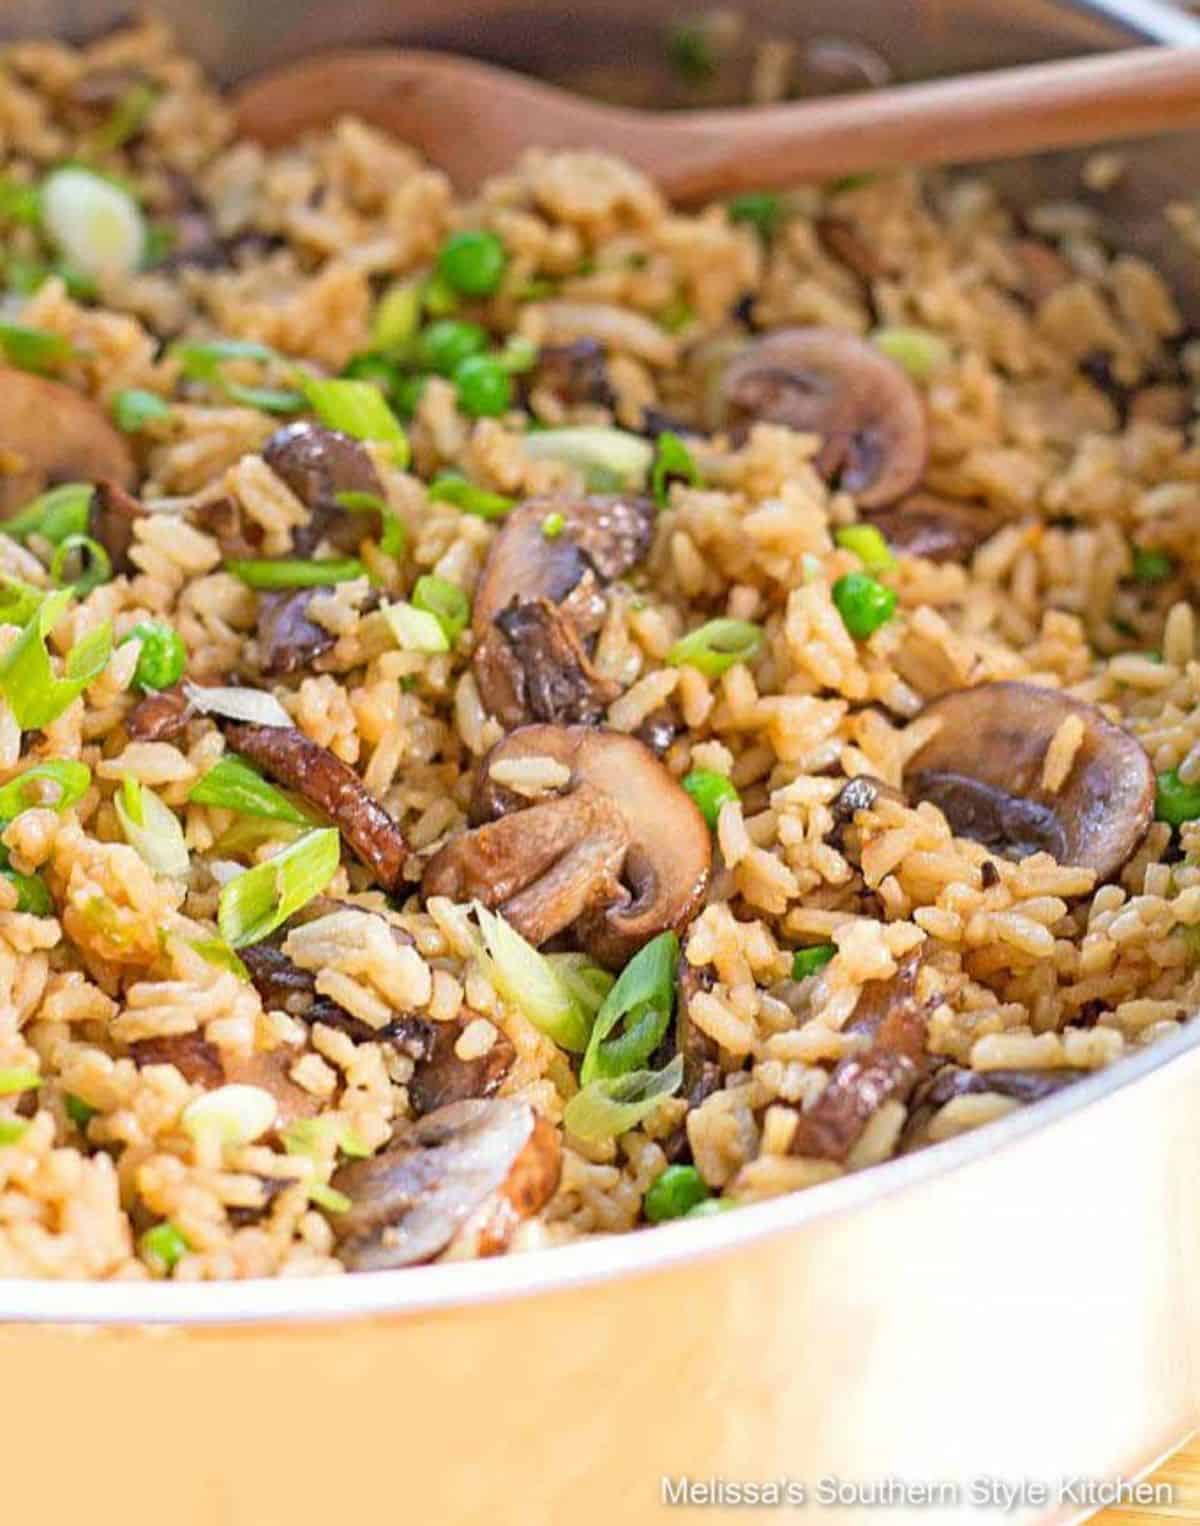 Delicious Teriyaki Rice Pilaf With Mushrooms and Peas in a skillet with a wooden spoon.